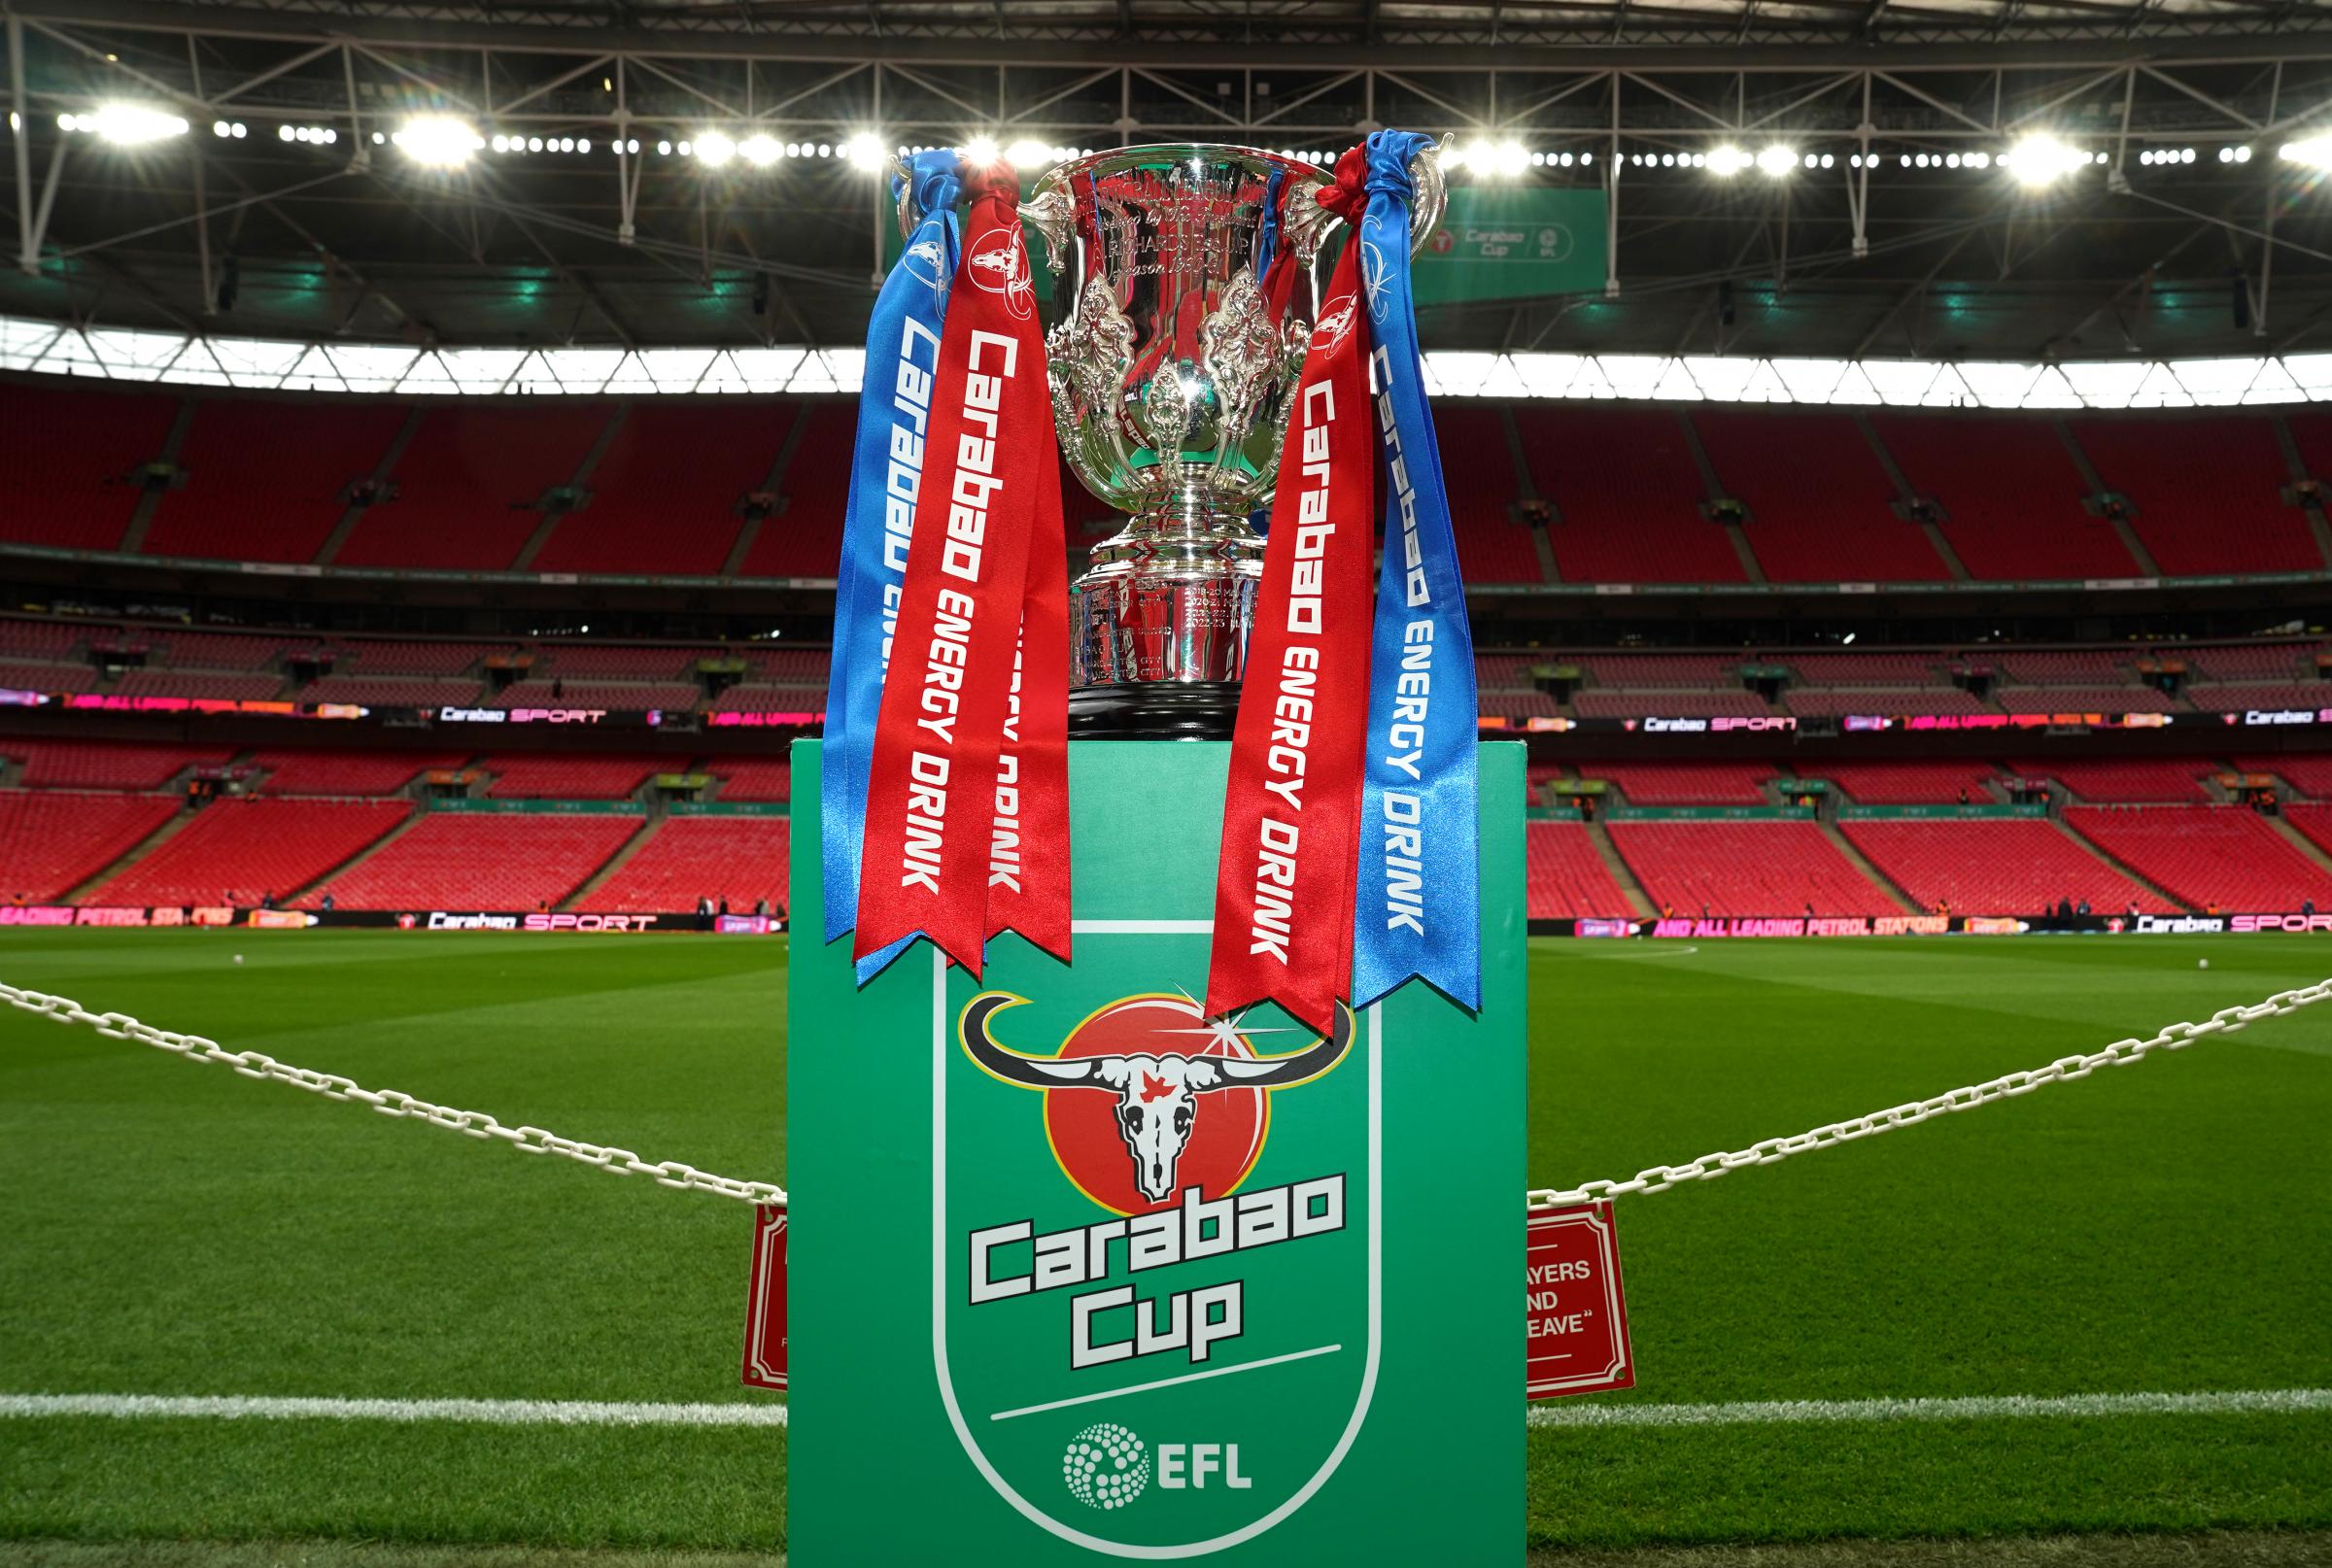 Carabao Cup first round draw: Middlesbrough & Sunderland's draw